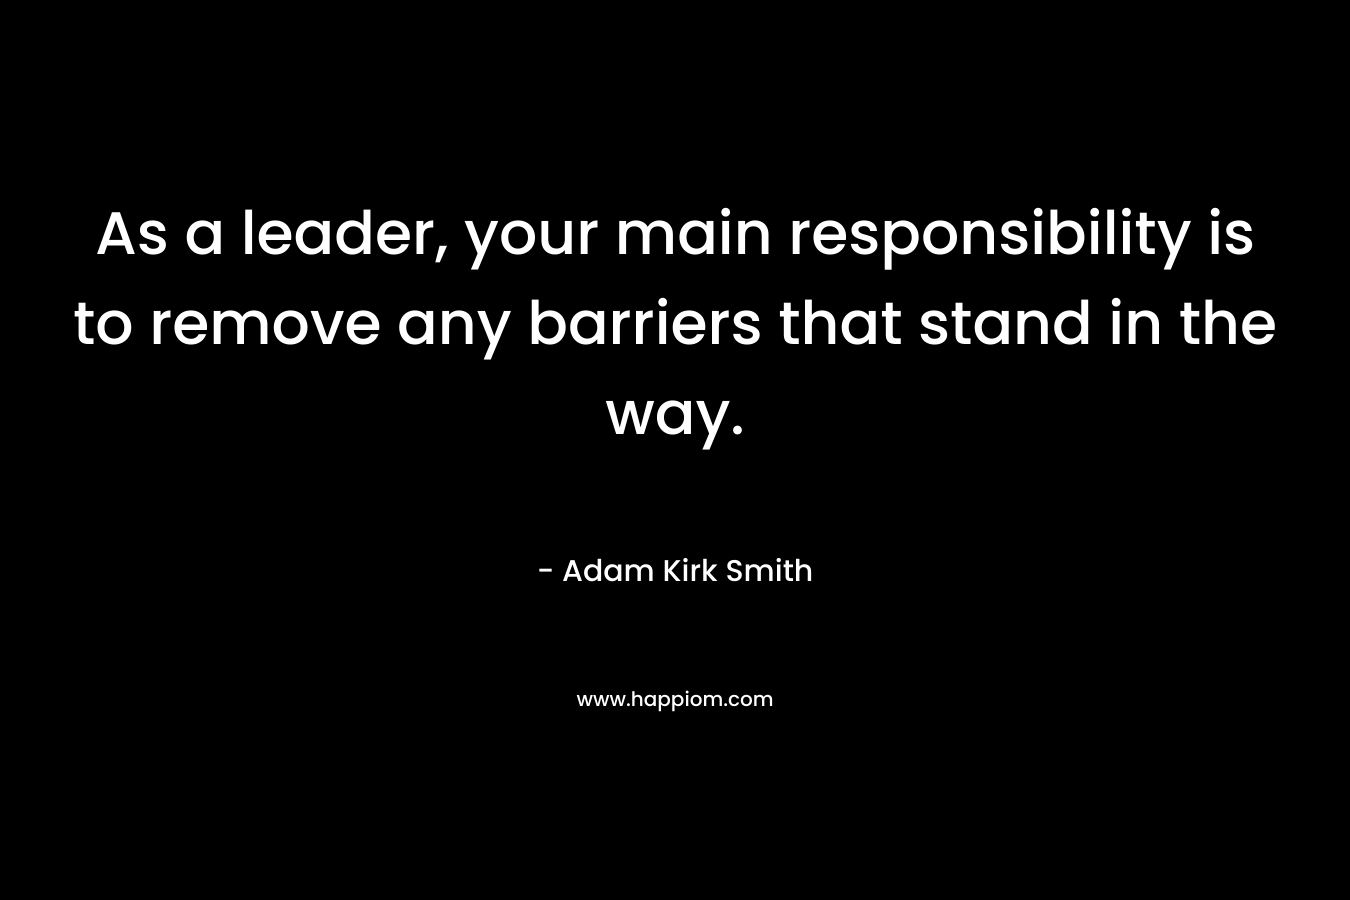 As a leader, your main responsibility is to remove any barriers that stand in the way. – Adam Kirk Smith